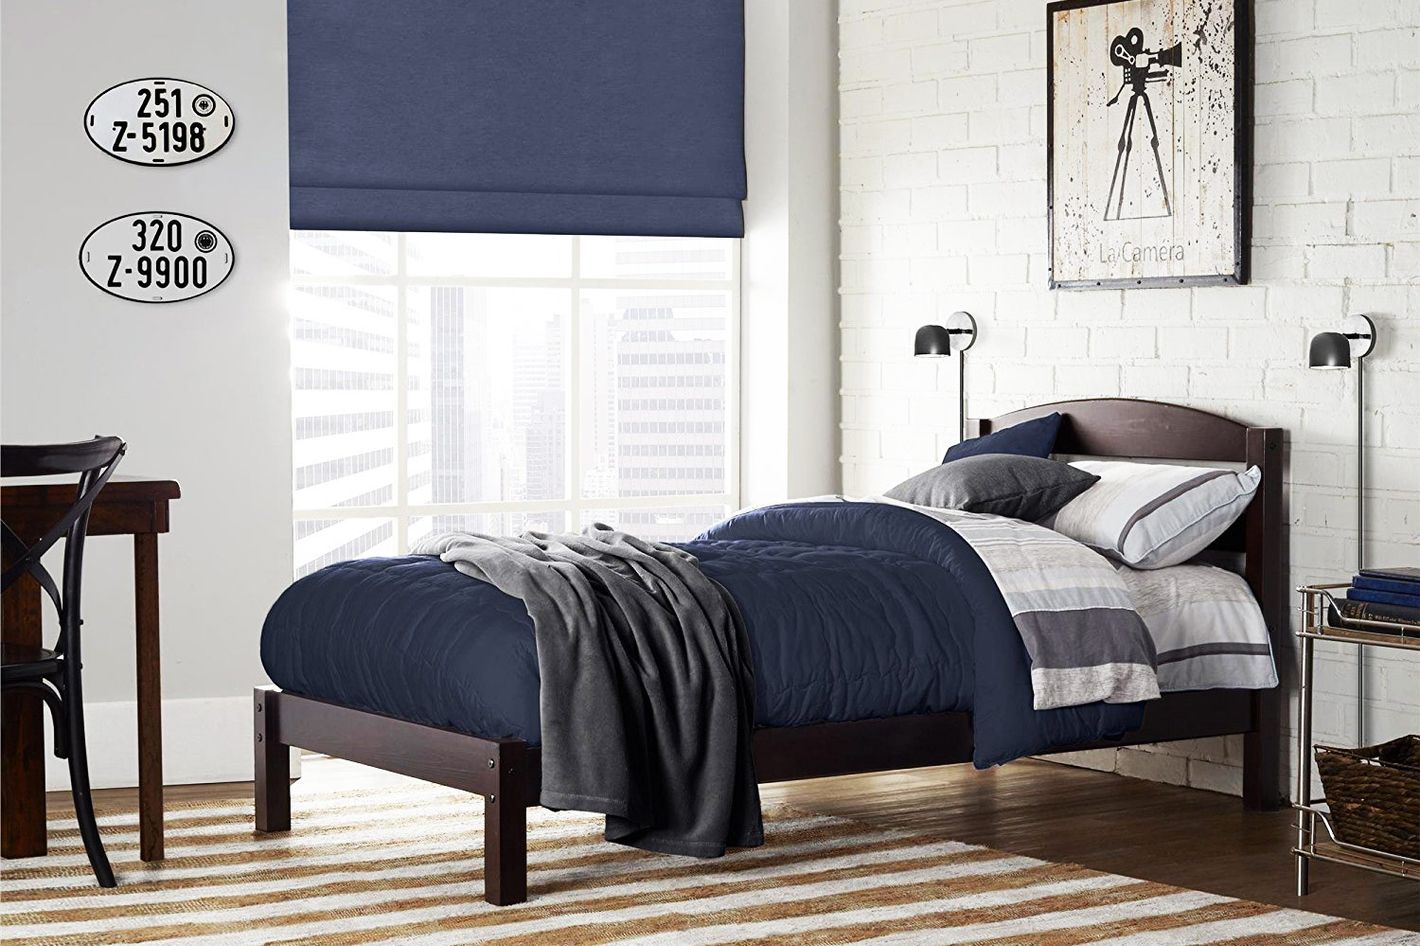 12 Best Twin Beds For Kids 2019, Is A Twin Bed Big Enough For One Person